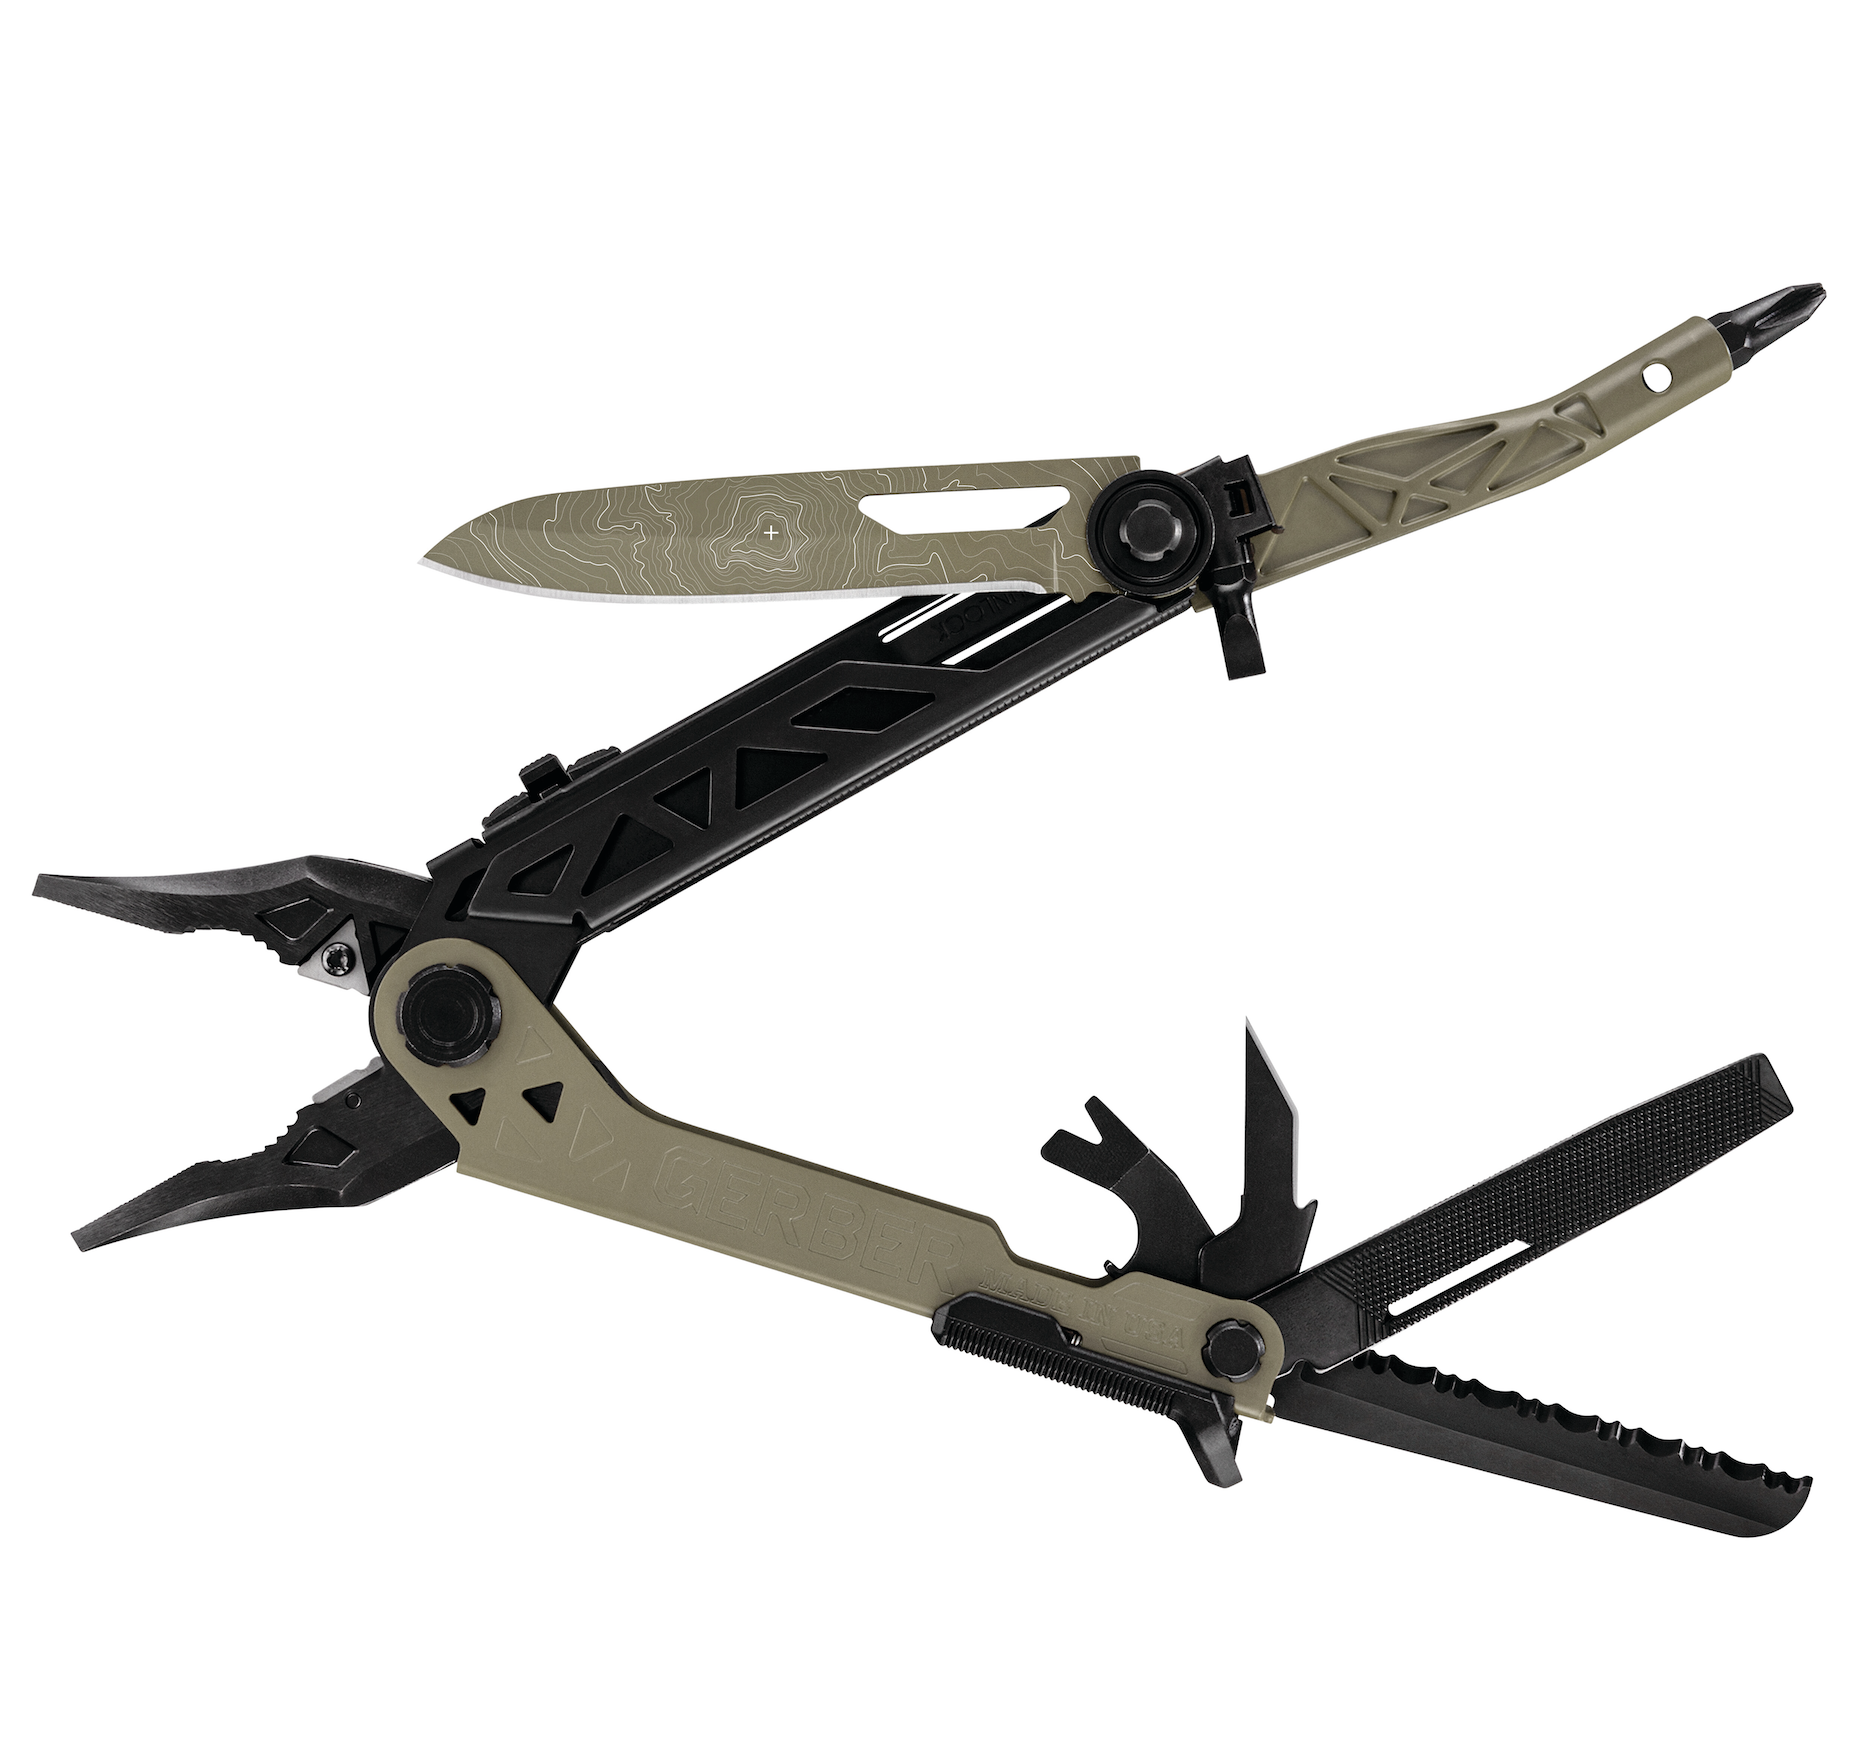 Gerber Launches First Customizable Multi-tool – Custom Center-Drive